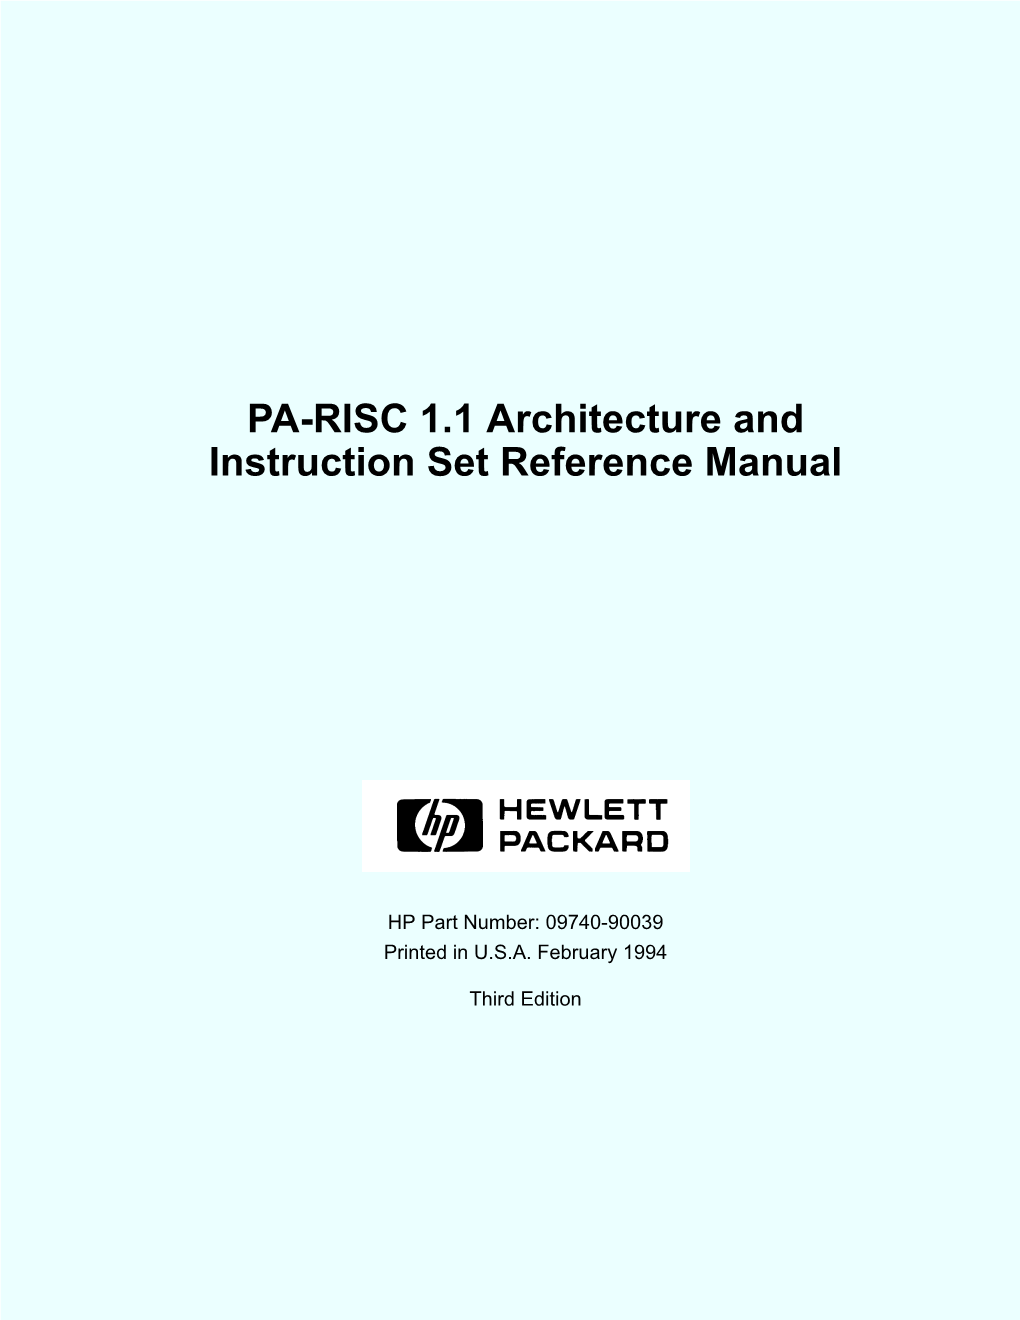 PA-RISC 1.1 Architecture and Instruction Set Reference Manual